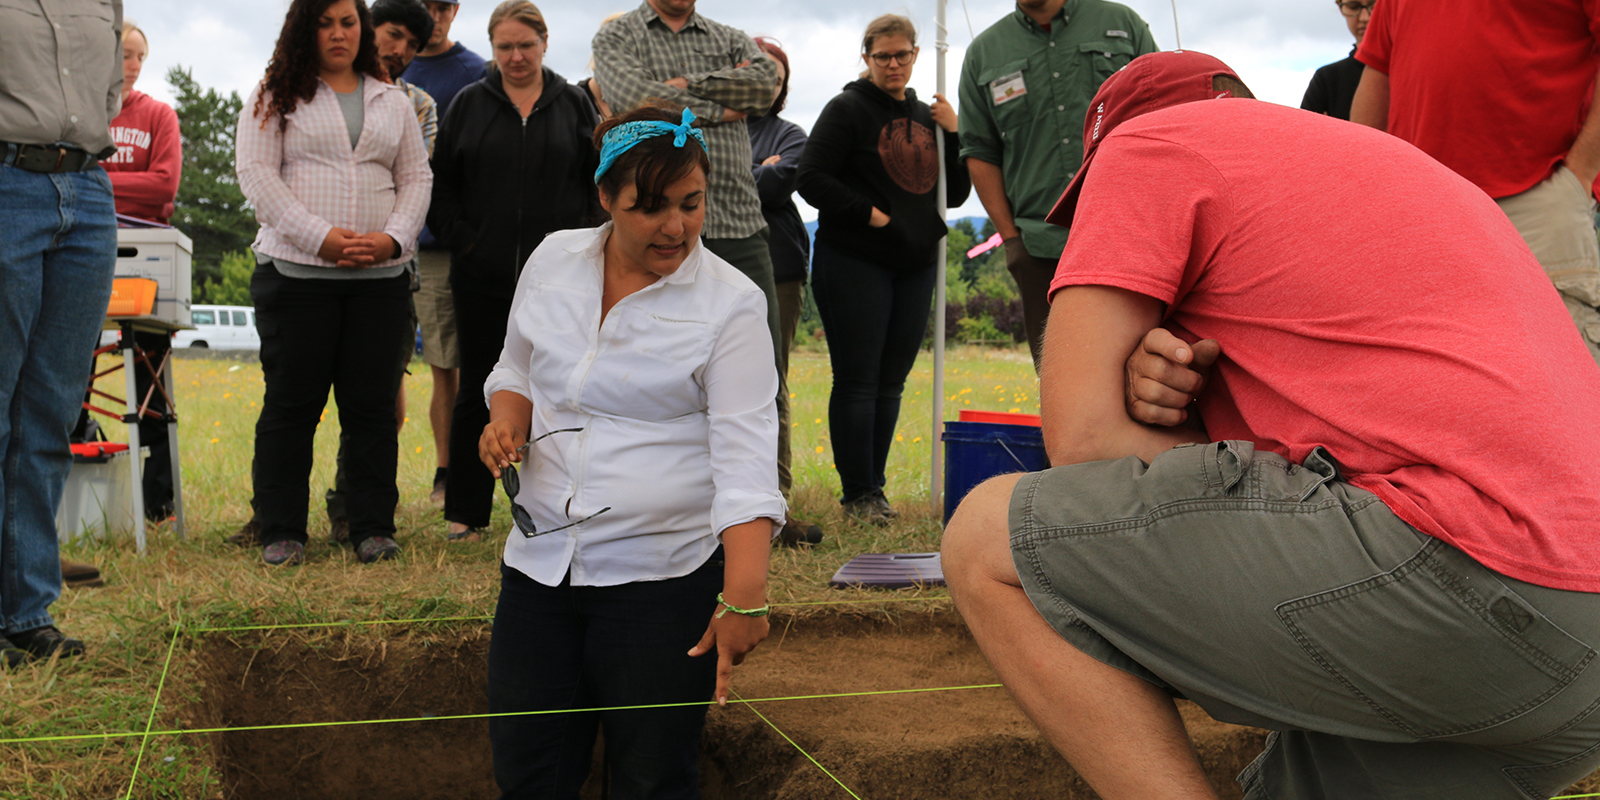 A woman stands in a pit pointing out an archaeology dig to other people